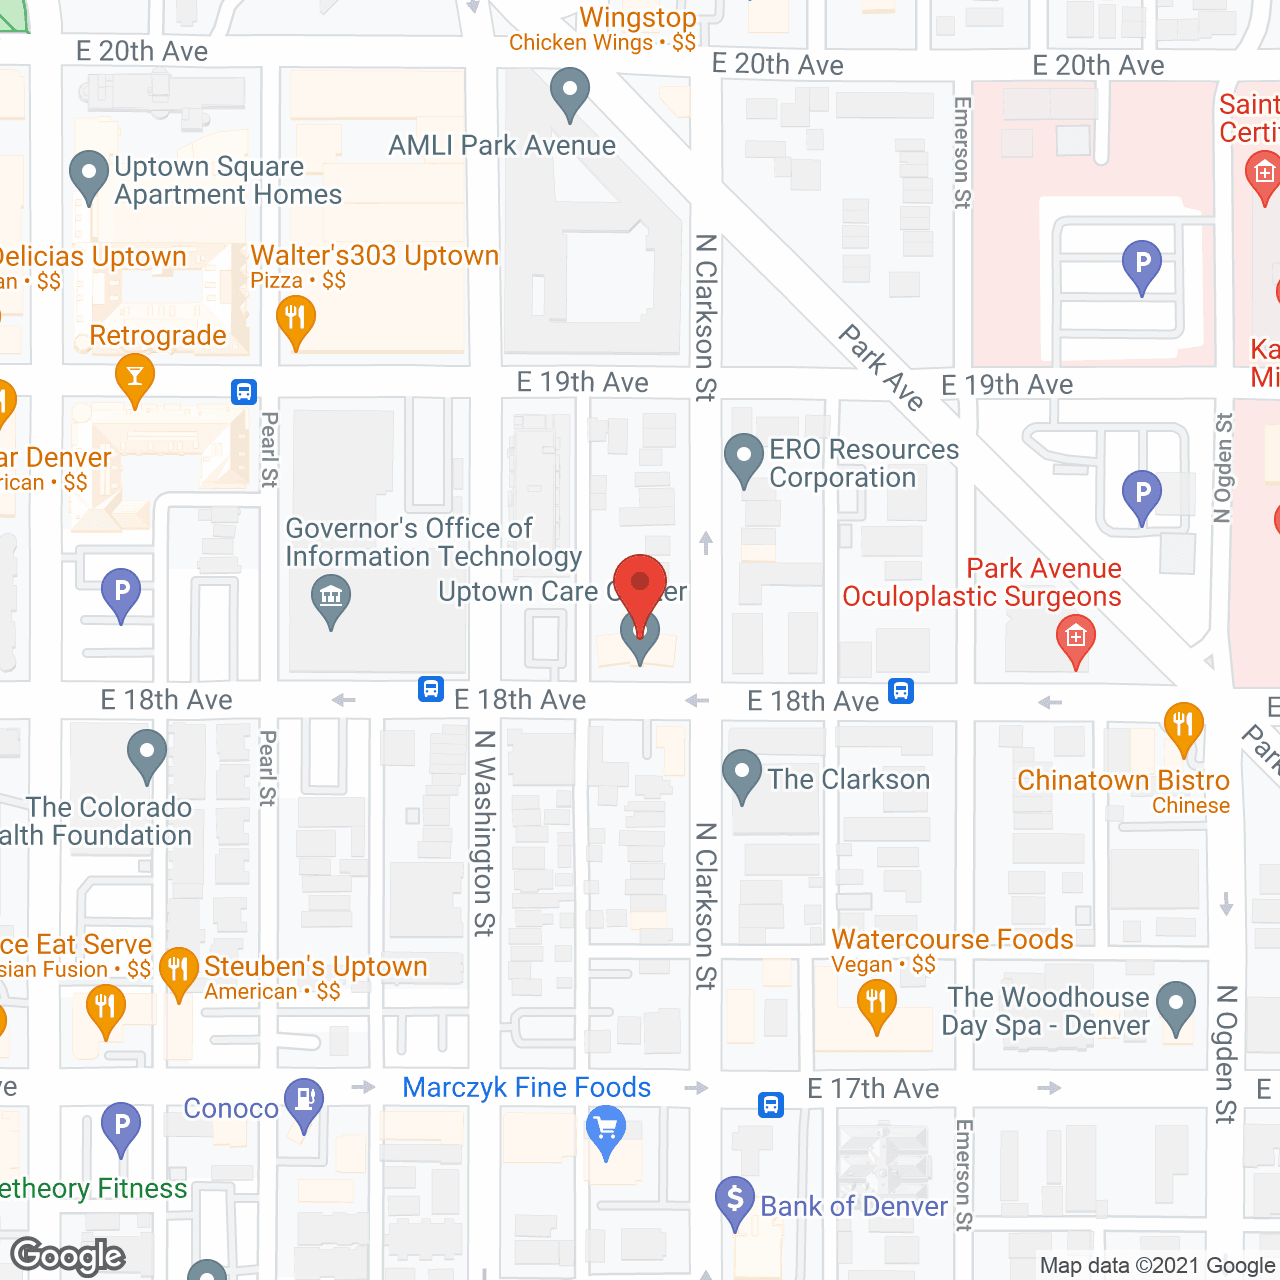 Uptown Health Care Ctr in google map